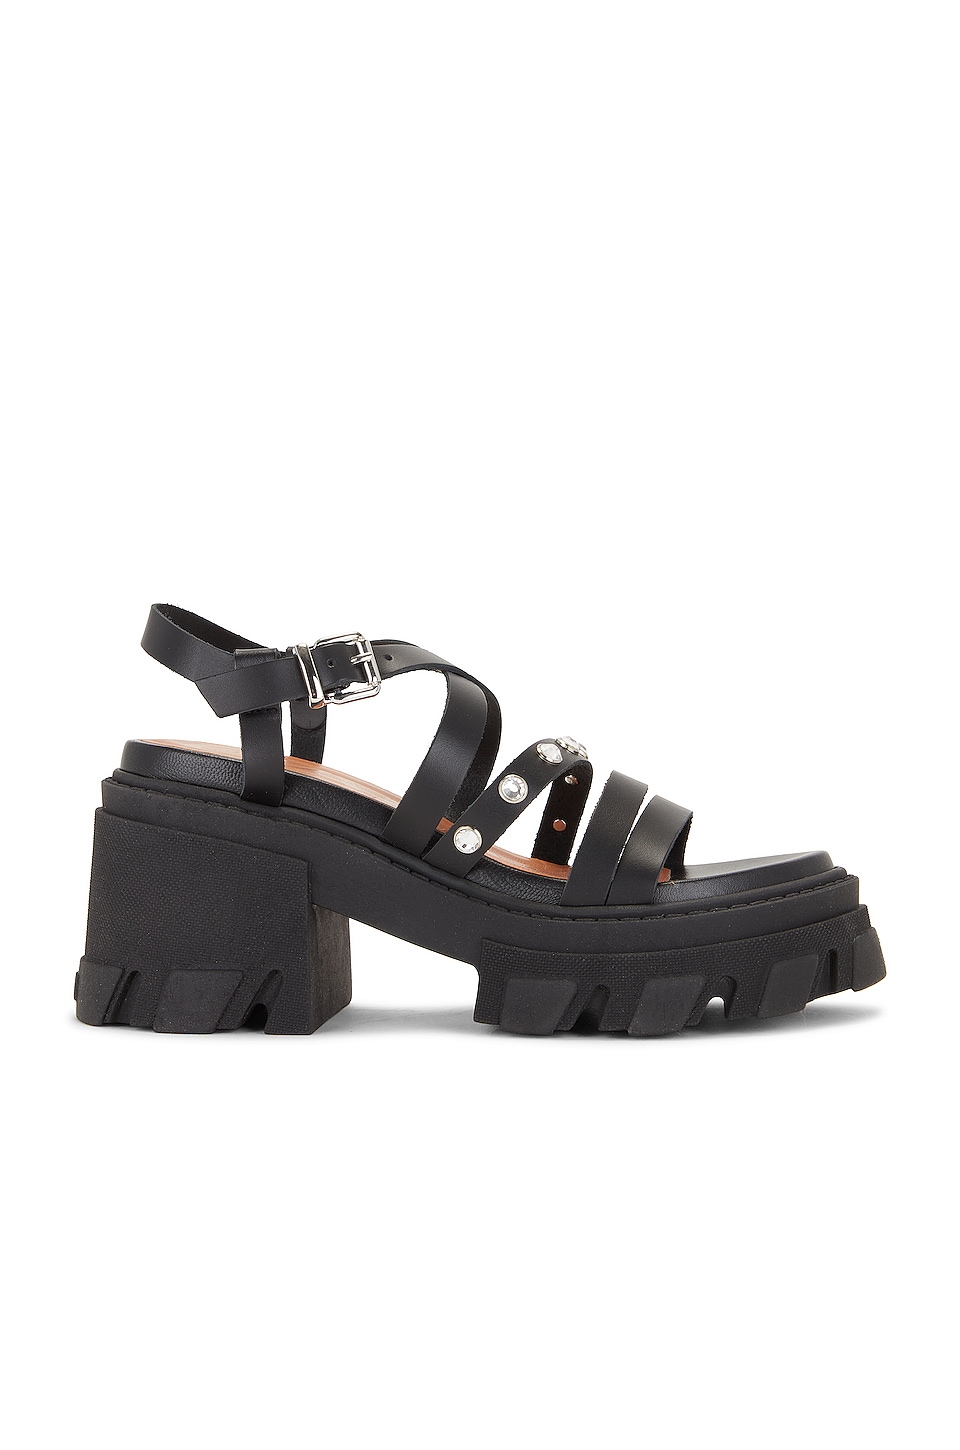 Ganni Cleated Strappy Sandal in Black | REVOLVE